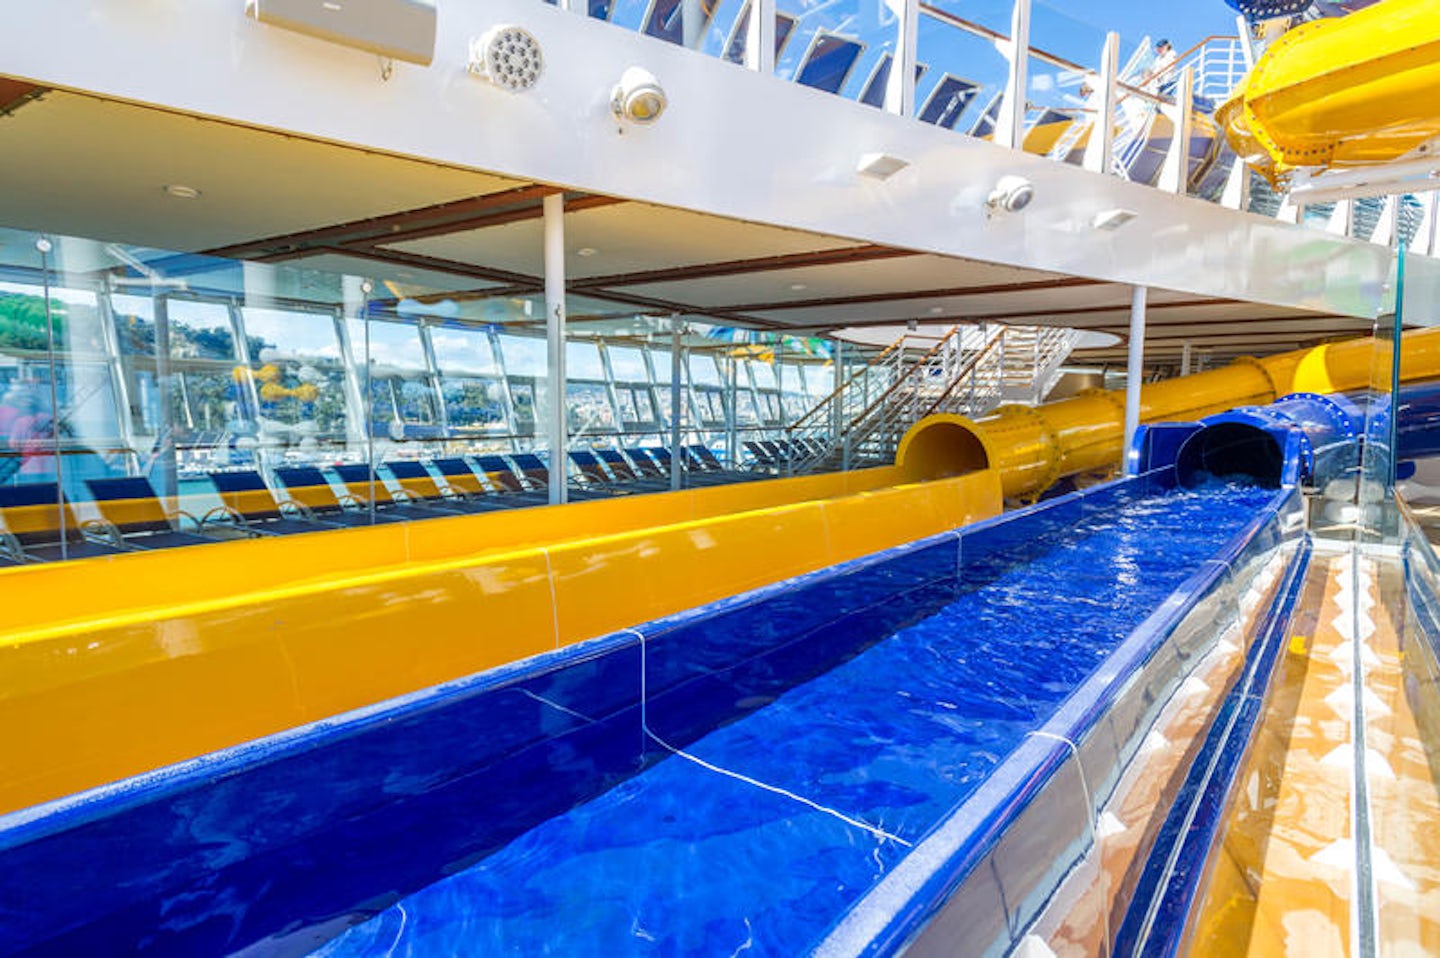 The Perfect Storm Water Slides on Symphony of the Seas